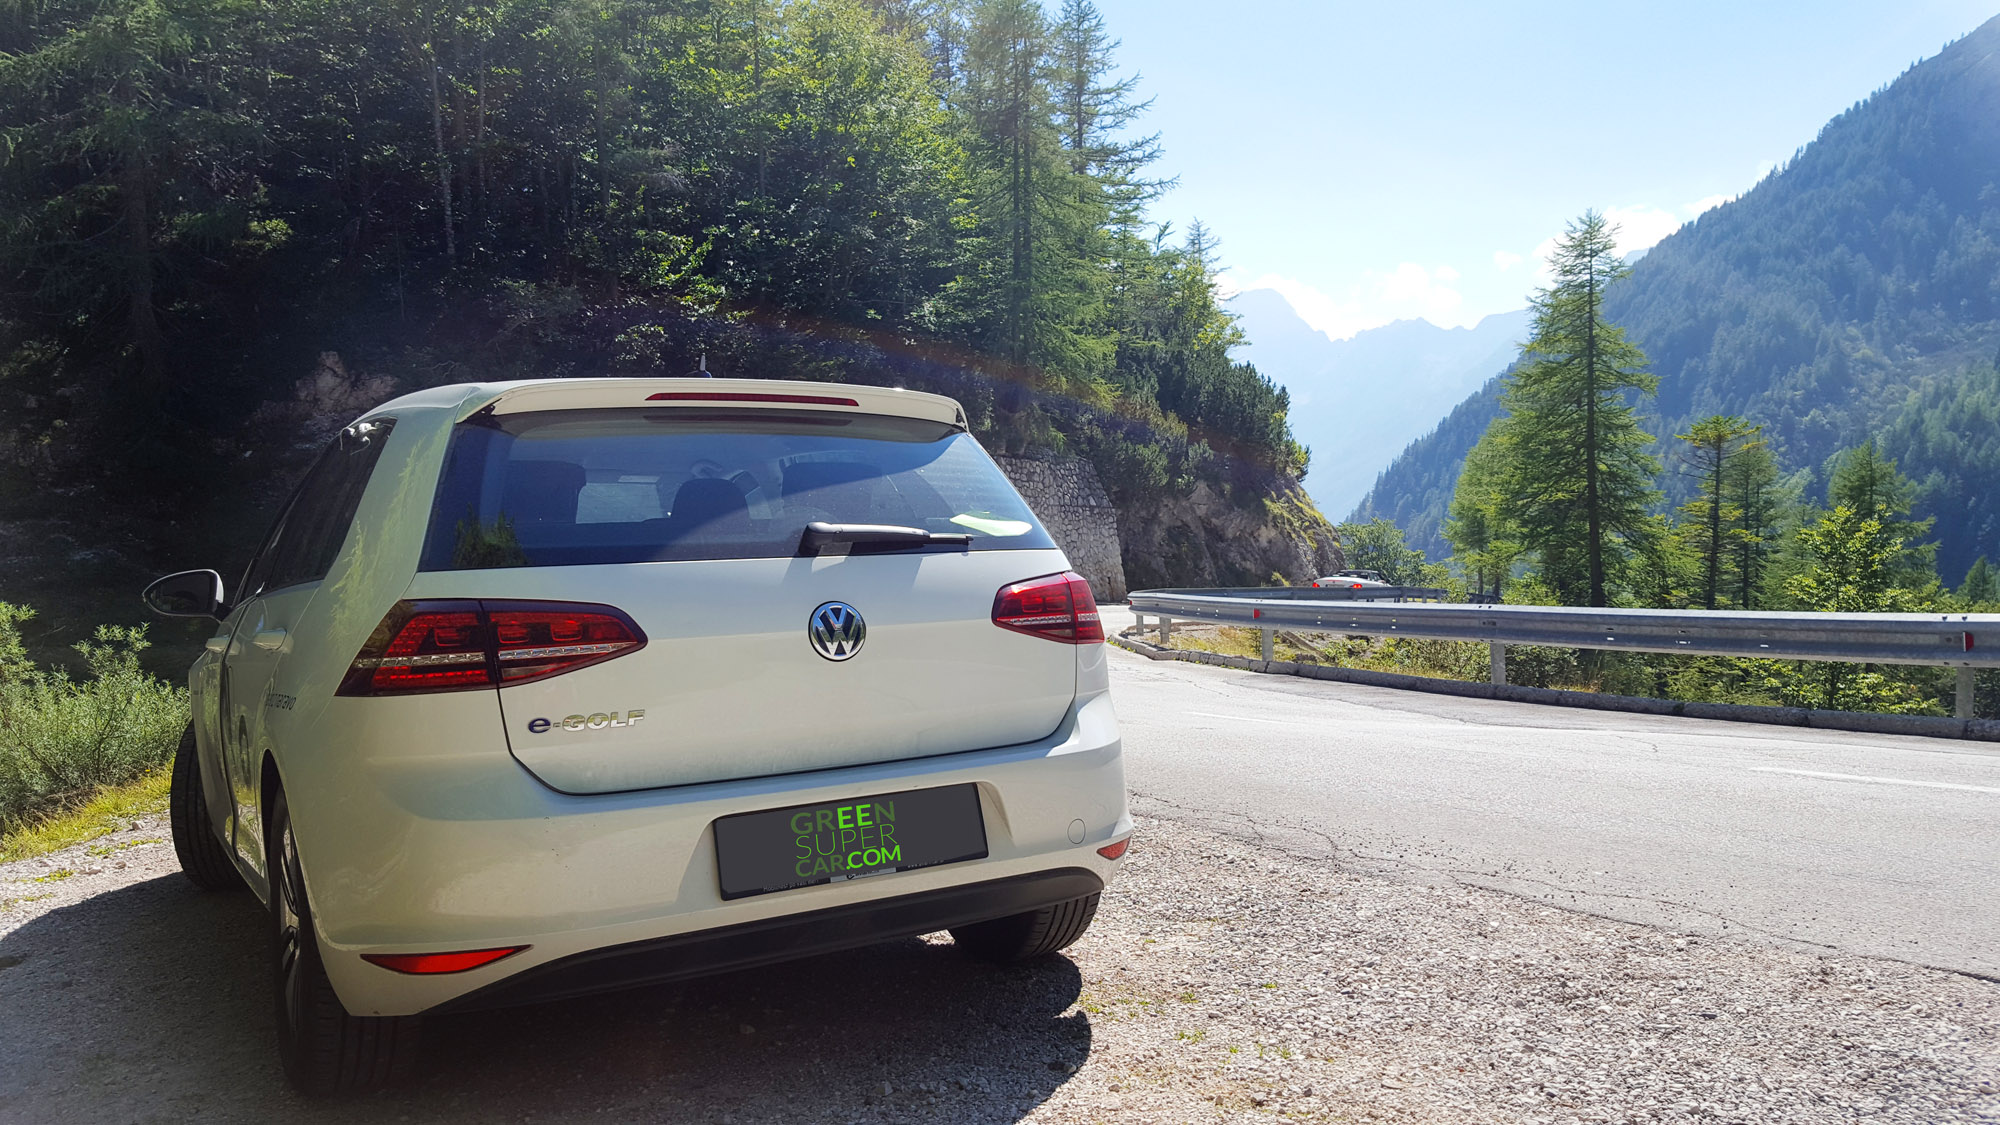 egolf is great city car for driving enthusiasts and families